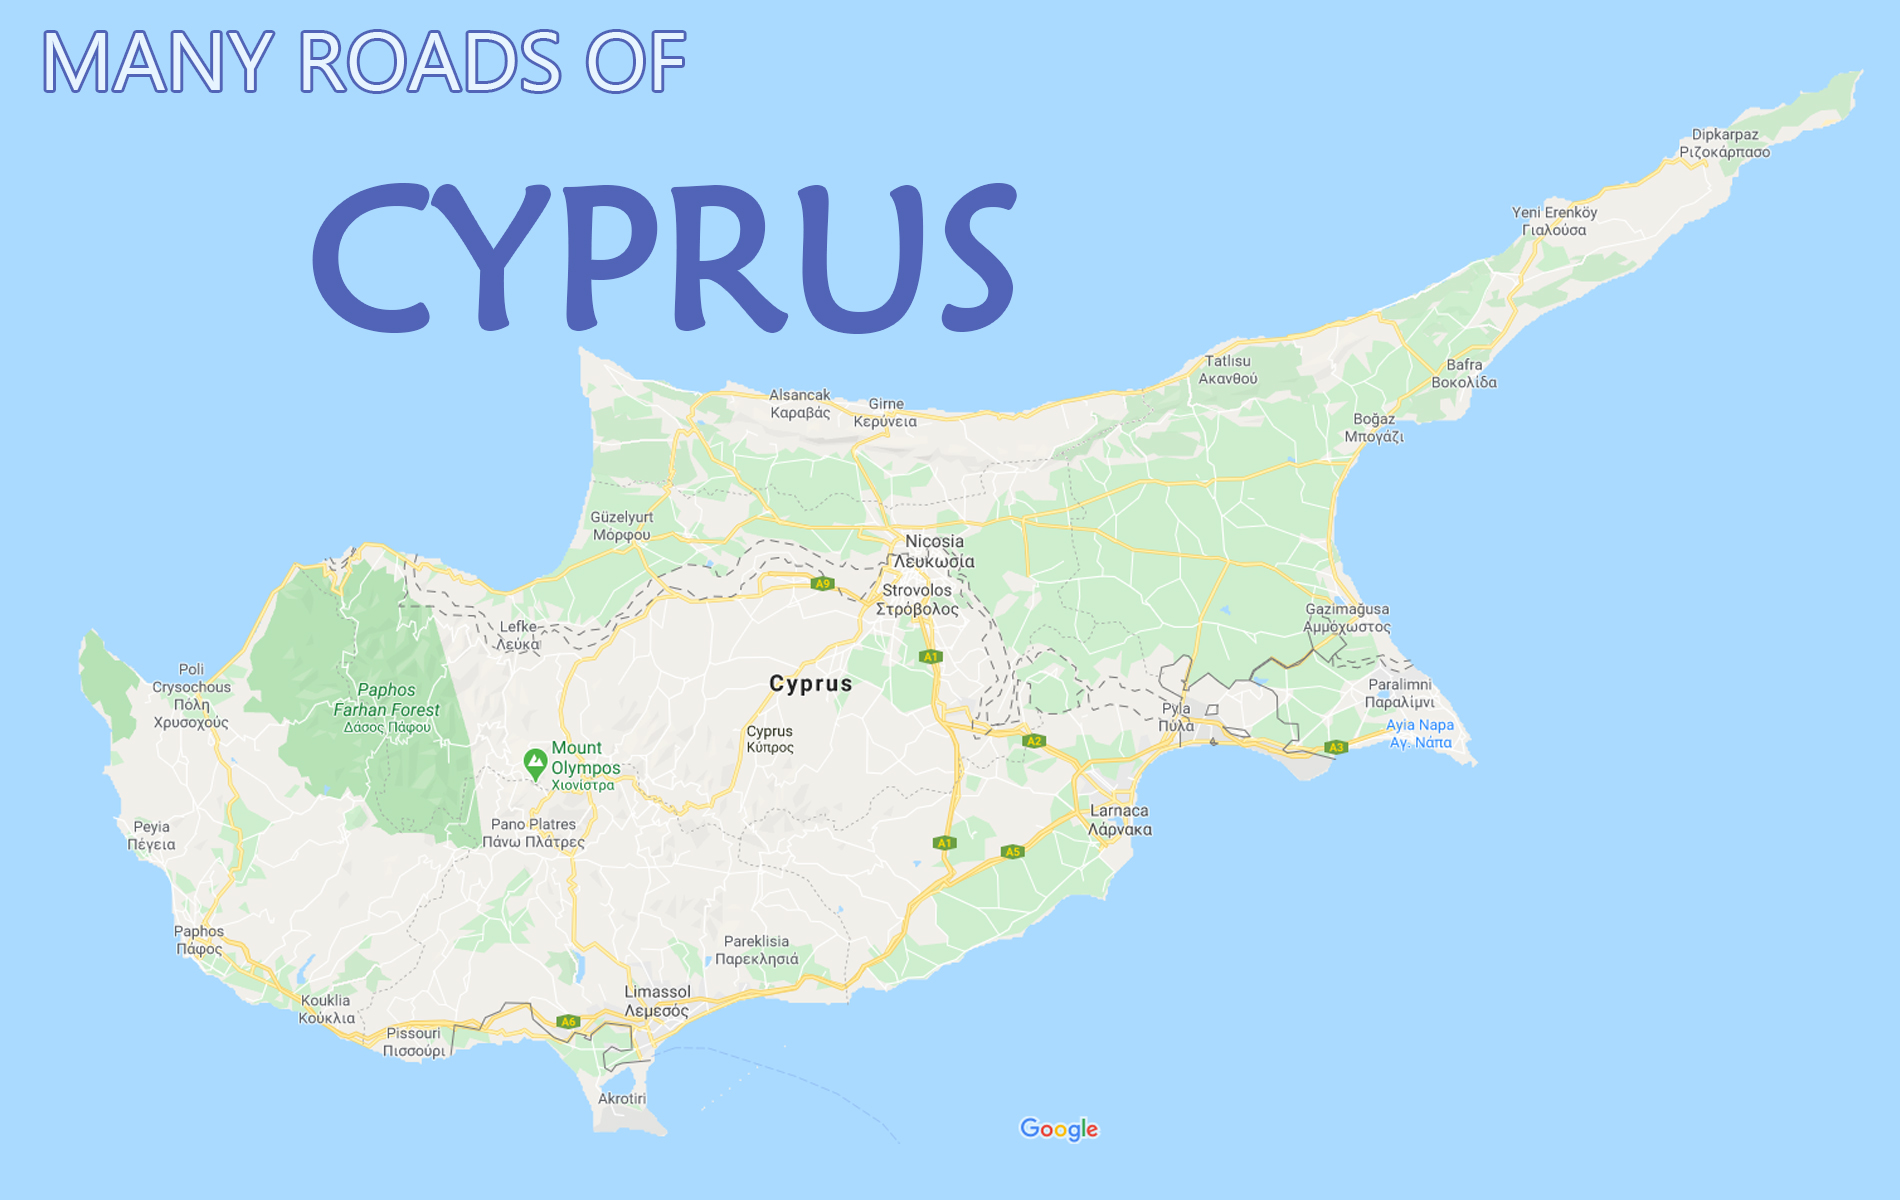 The many roads of Cyprus for Paphos taxi